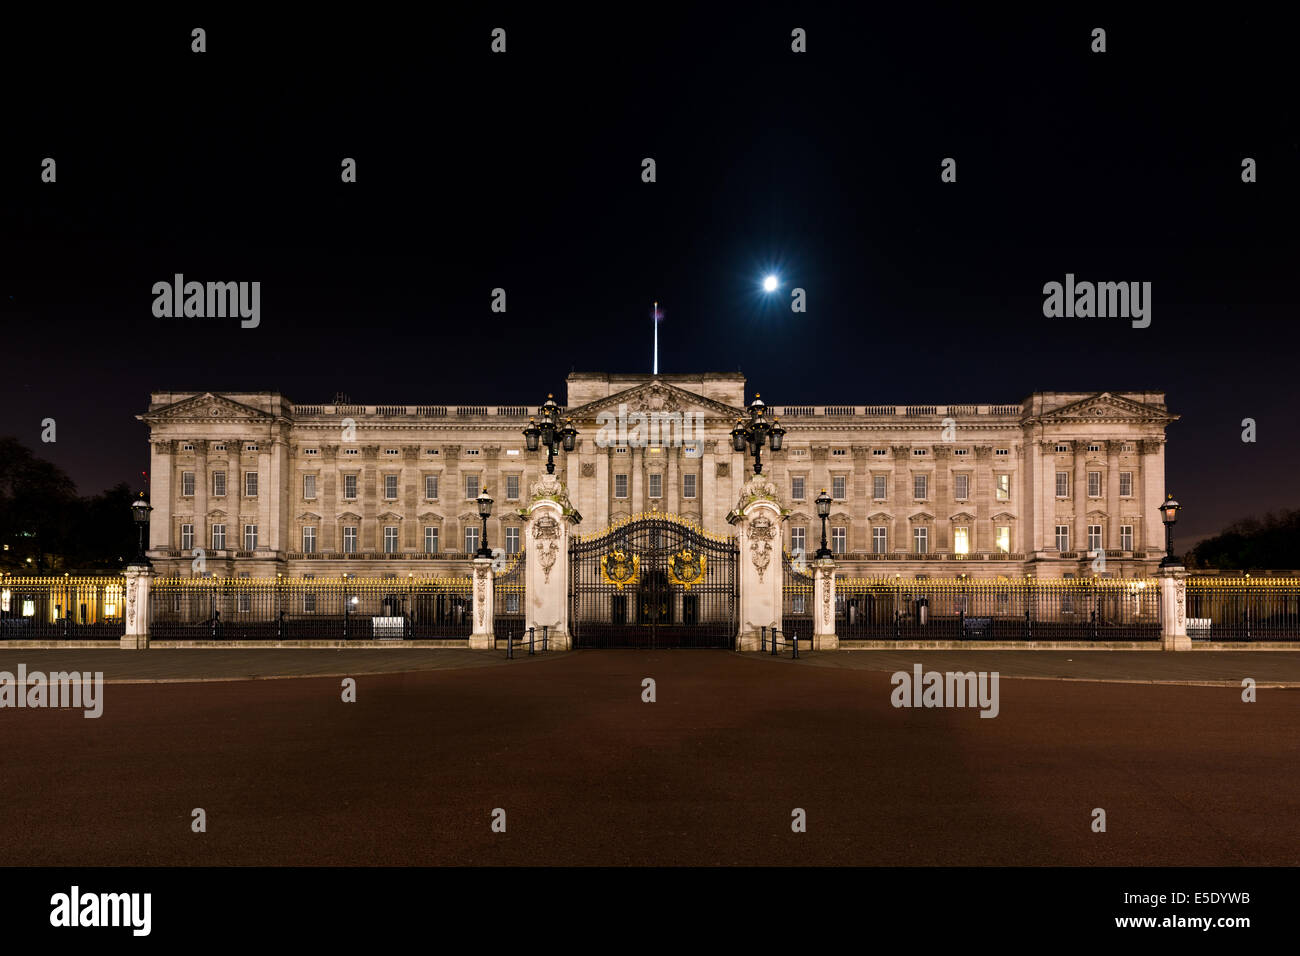 Buckingham Palace is the official London residence and principal workplace of the monarchy of the United Kingdom. Stock Photo